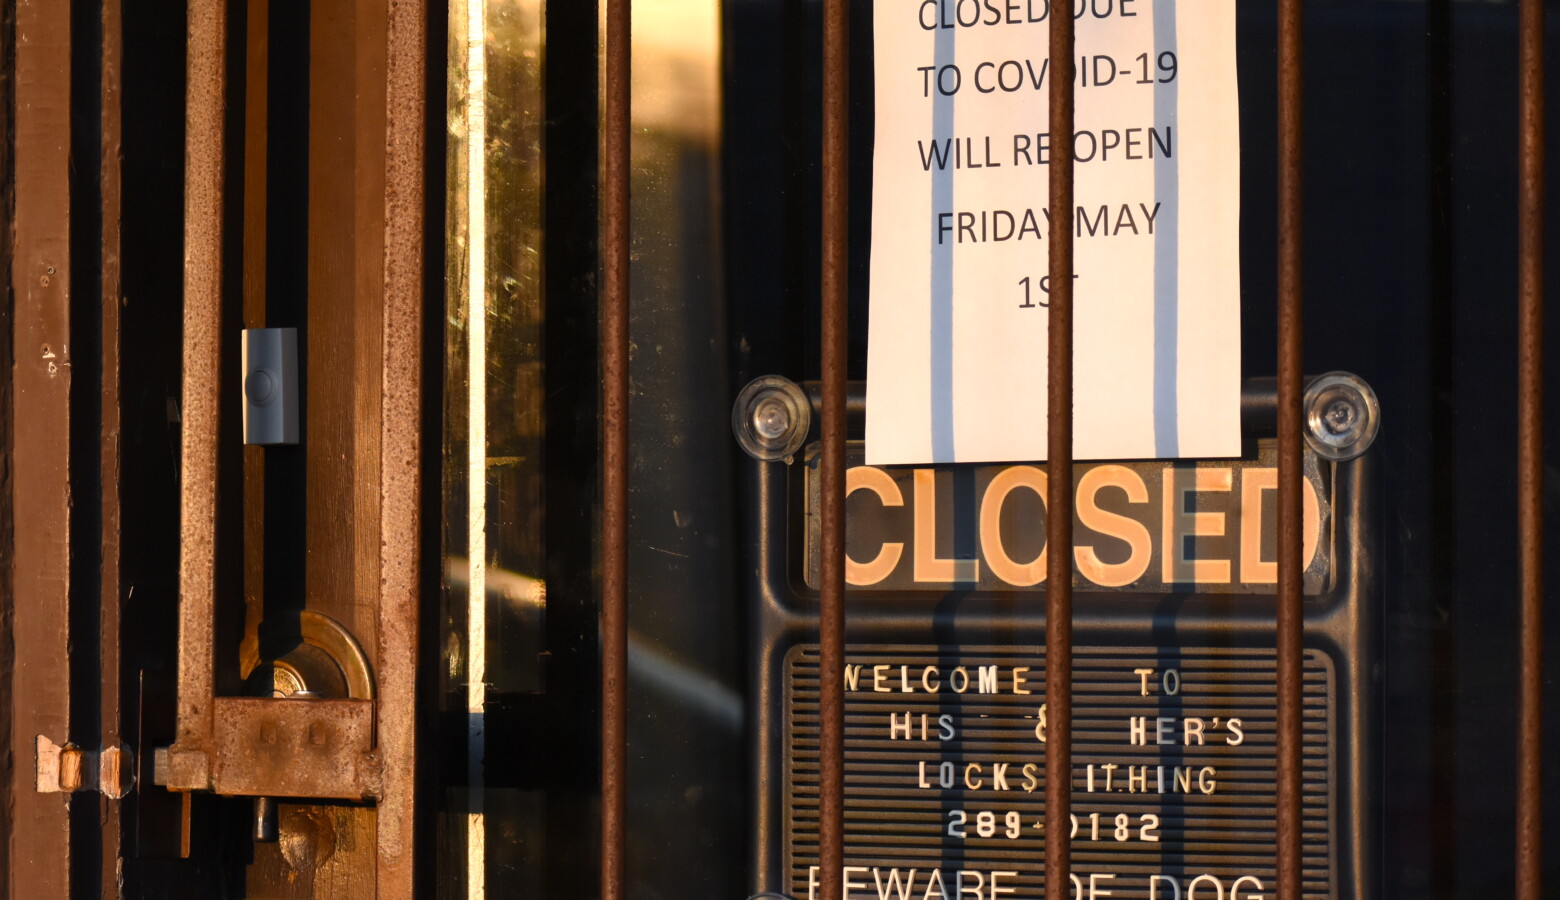 A business in South Bend temporarily closed due to COVID-19. (Justin Hicks/IPB News)